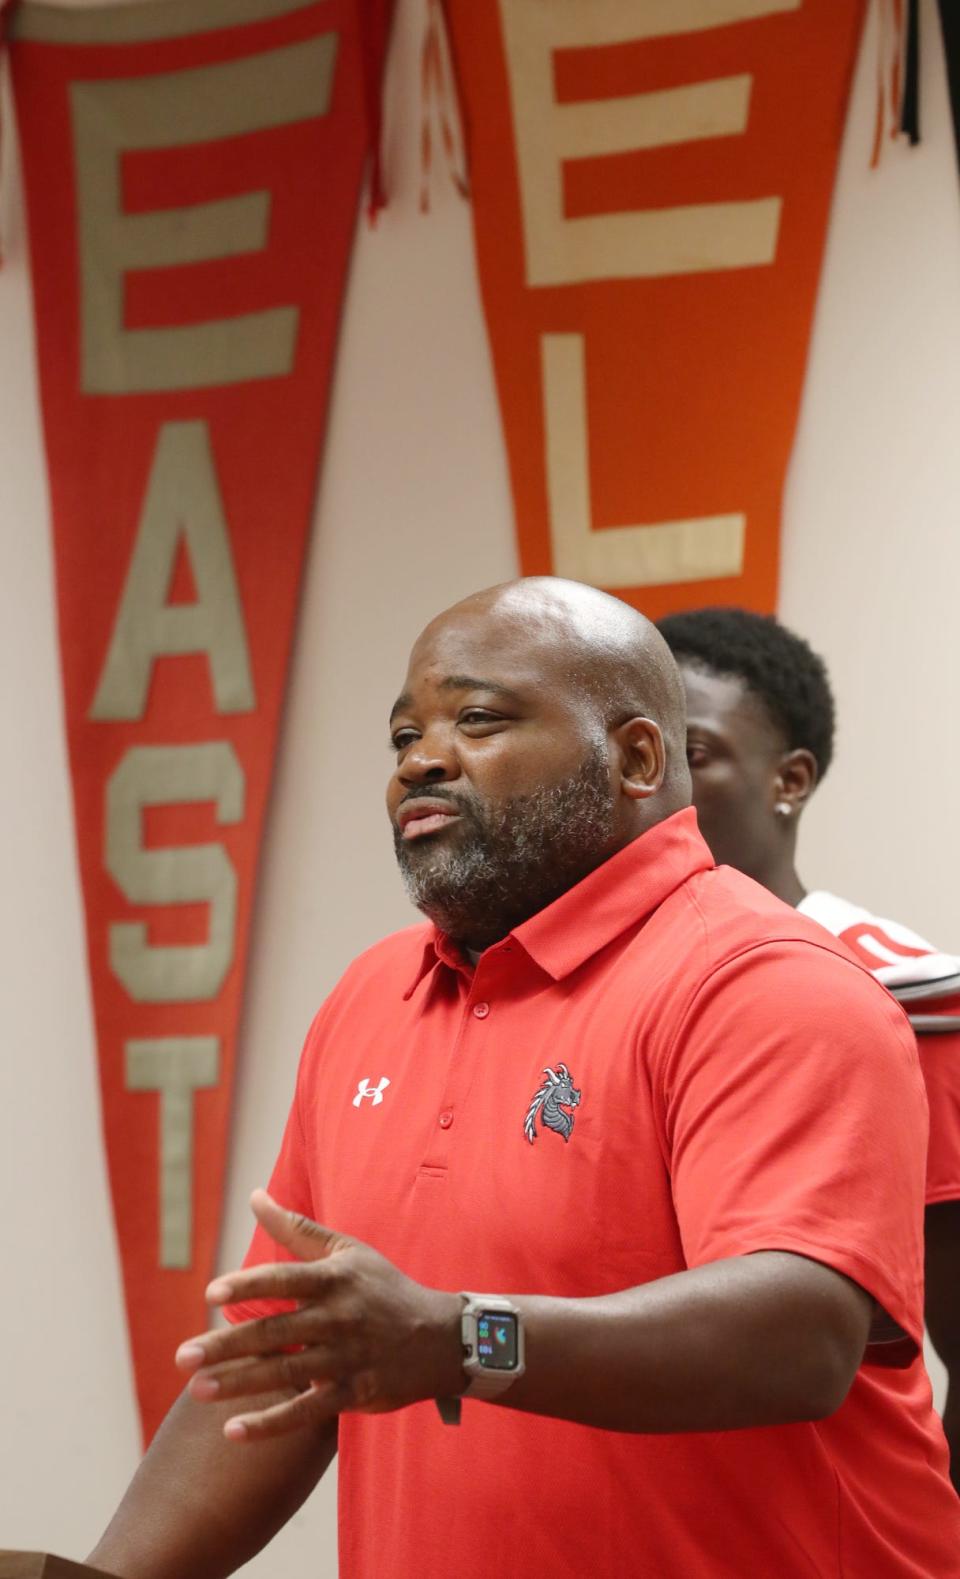 East's head coach Marques Hayes talks about football and being a leader during the City Series football luncheon at the Akron Education Association in Akron.